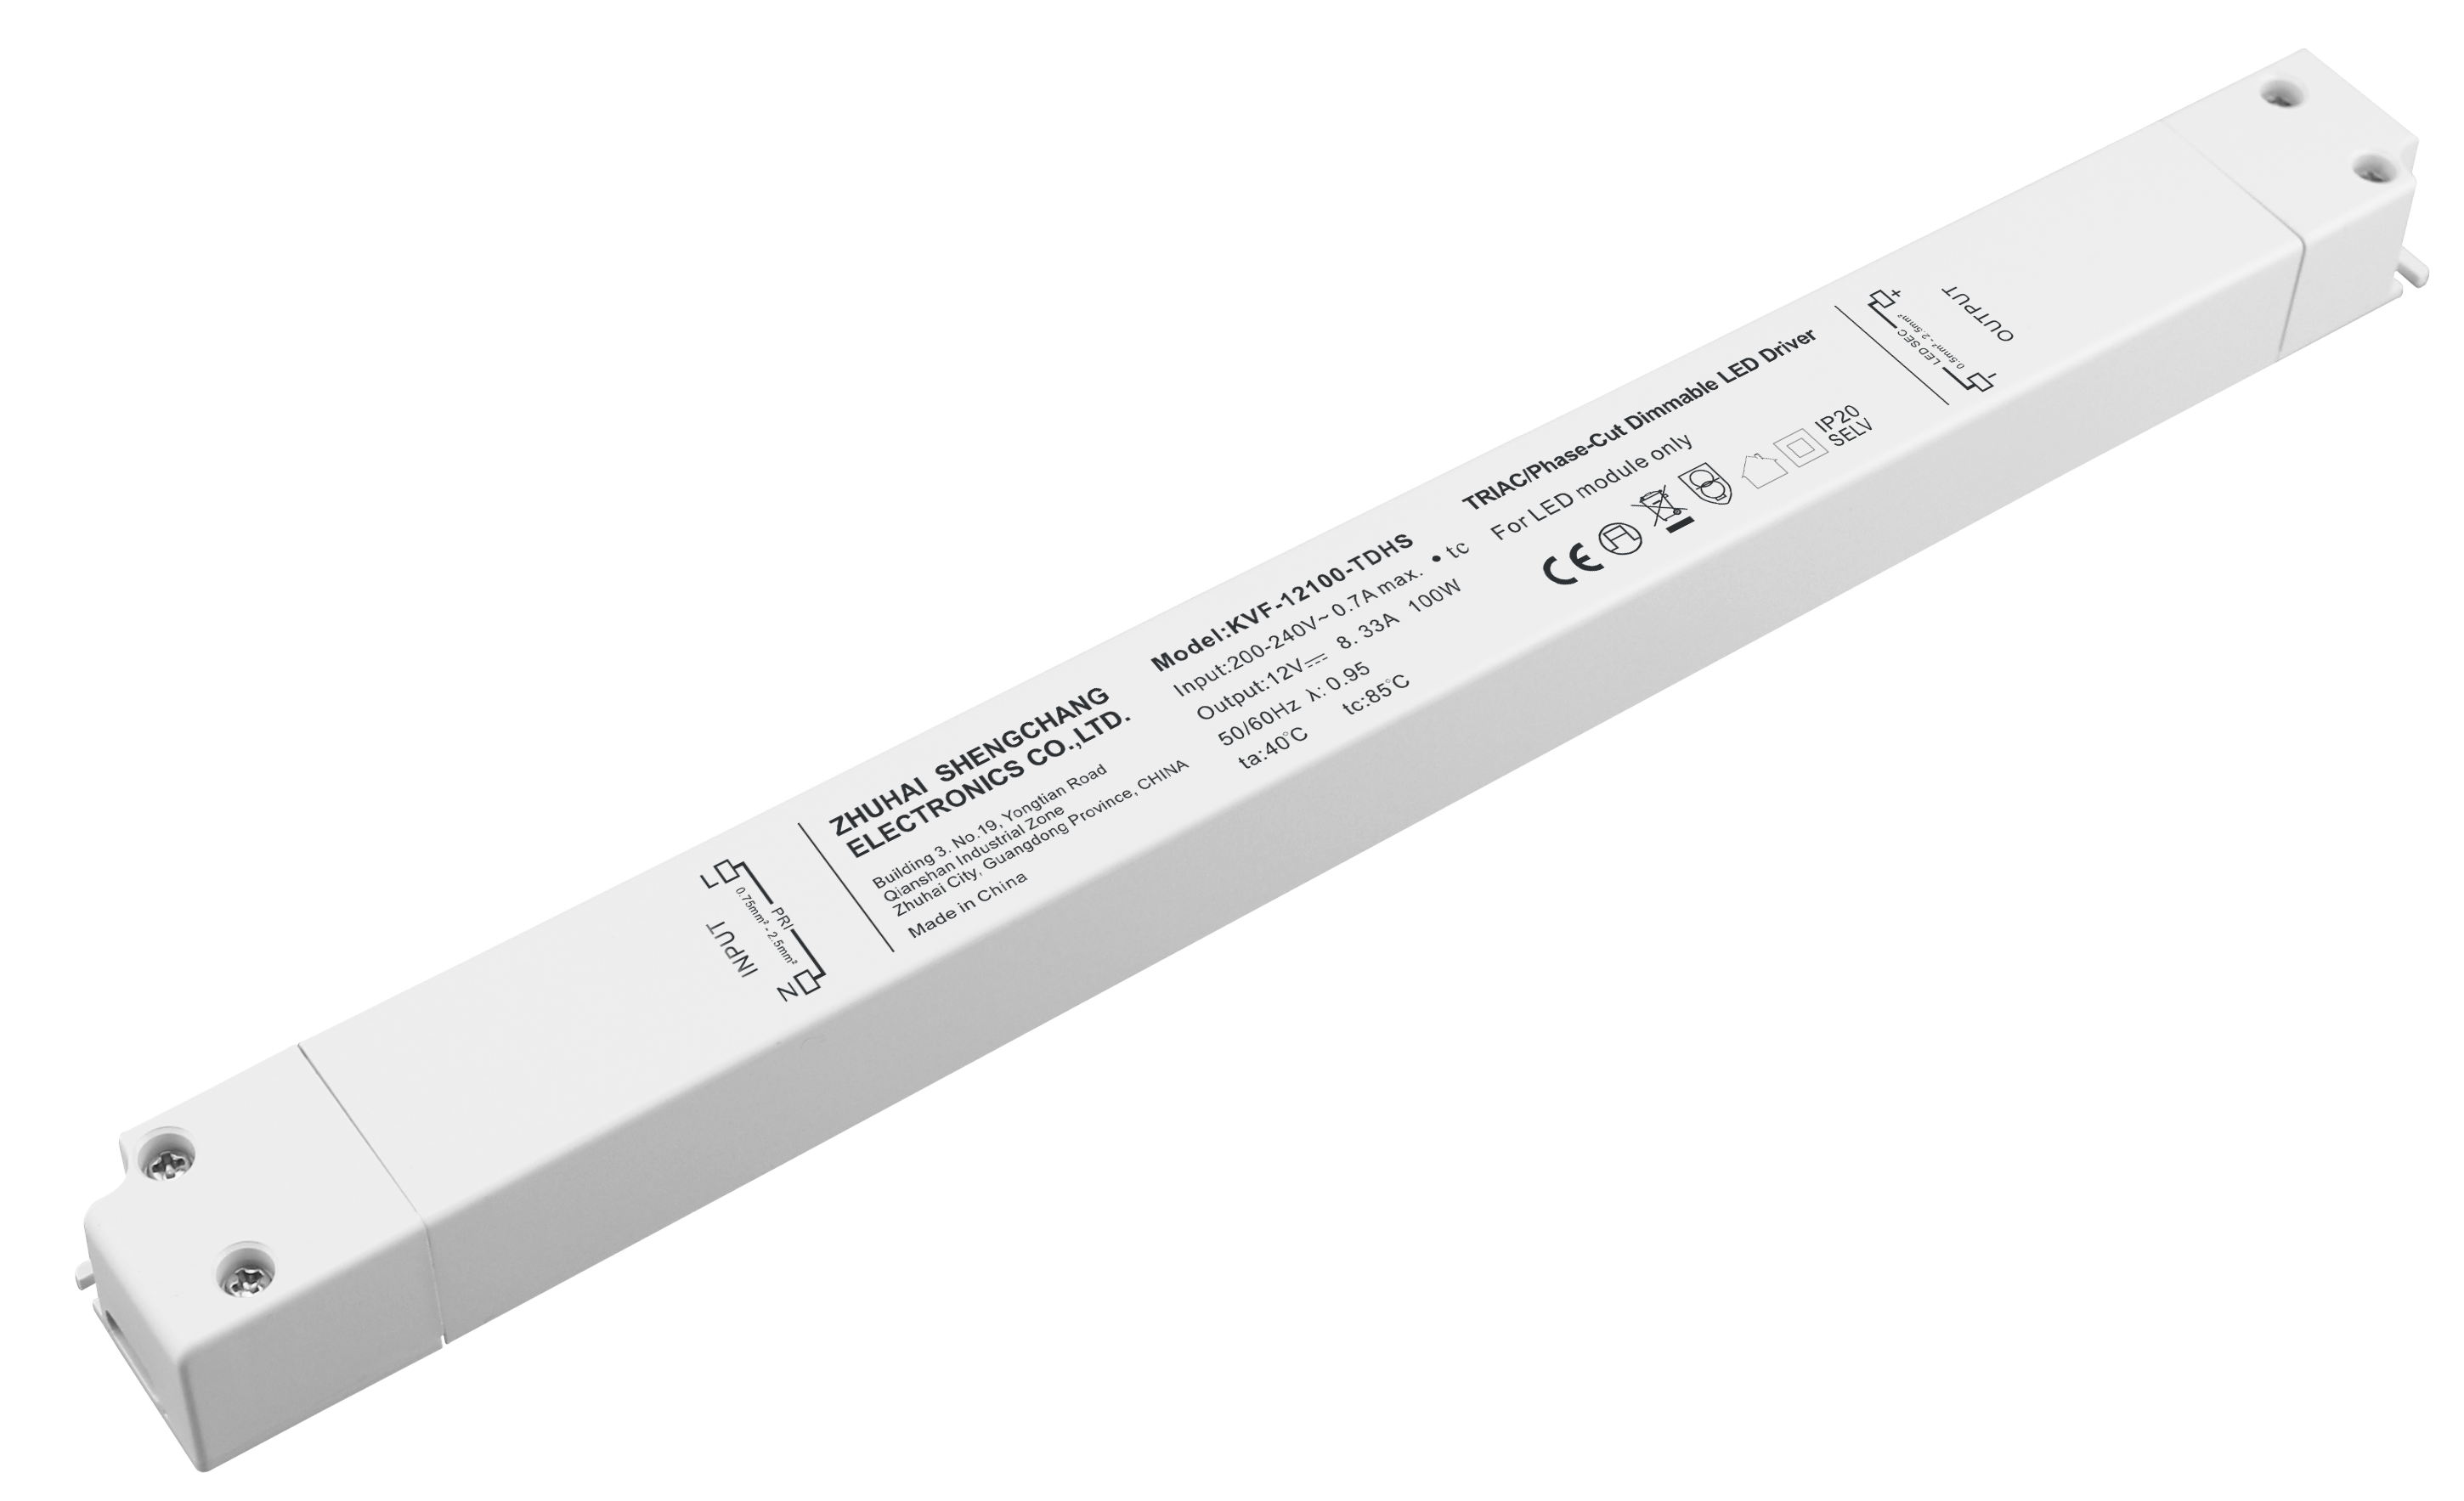 KVF-TDHS Series 100W Constant Voltage Triac Dimmable LED driver